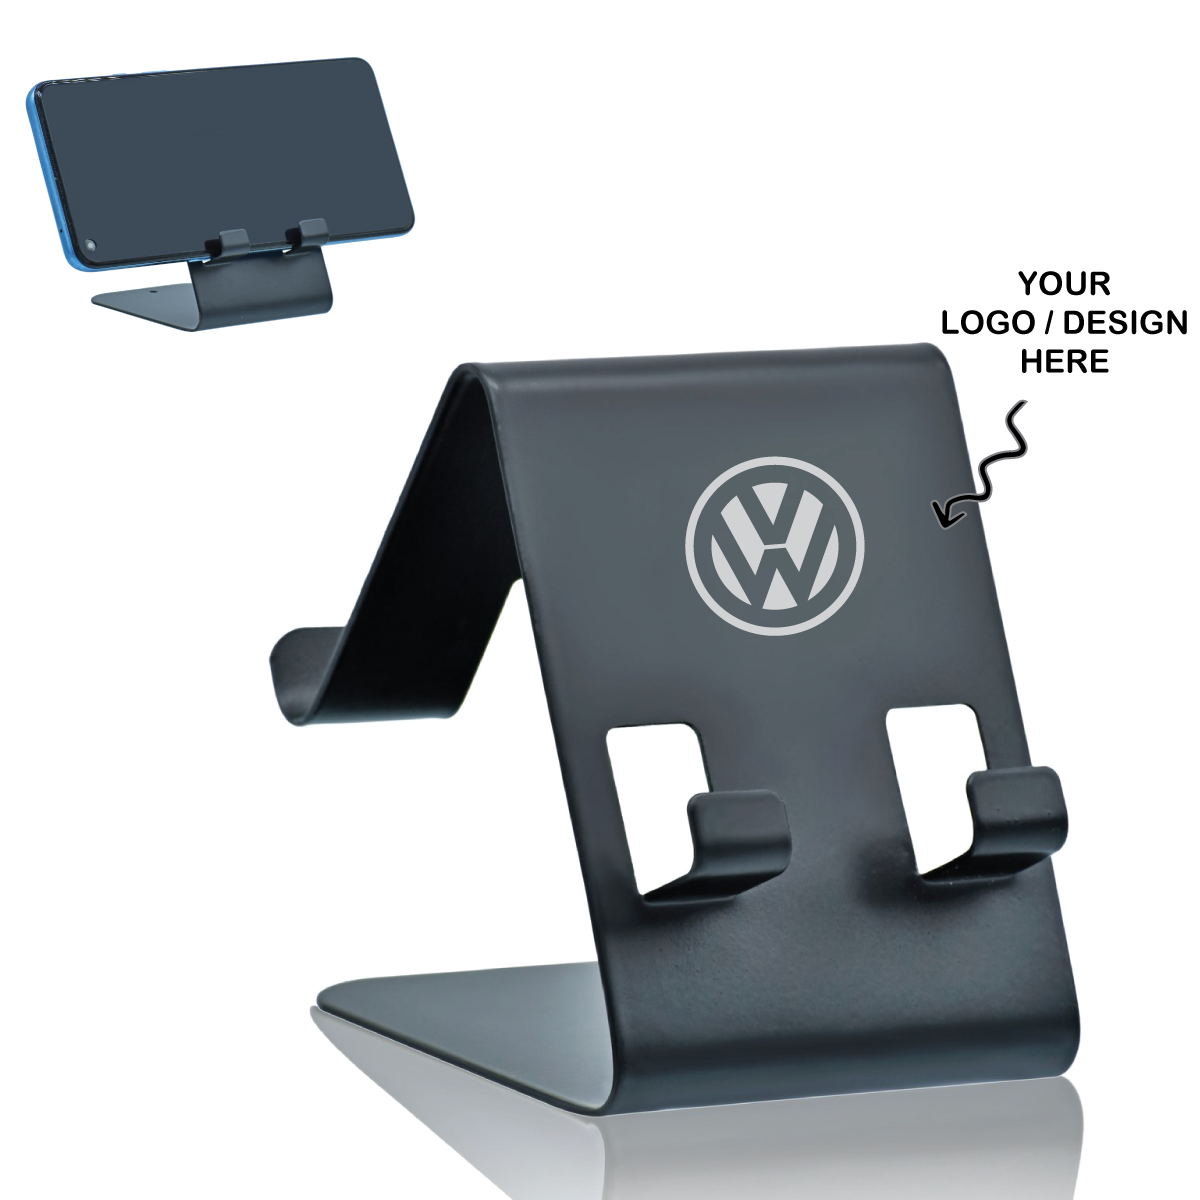 Personalized Metal Dual Side Phone Holder Mobile Stand - For Personal, Corporate Gifting, Return Gift, Event Gifting, Promotional Freebies